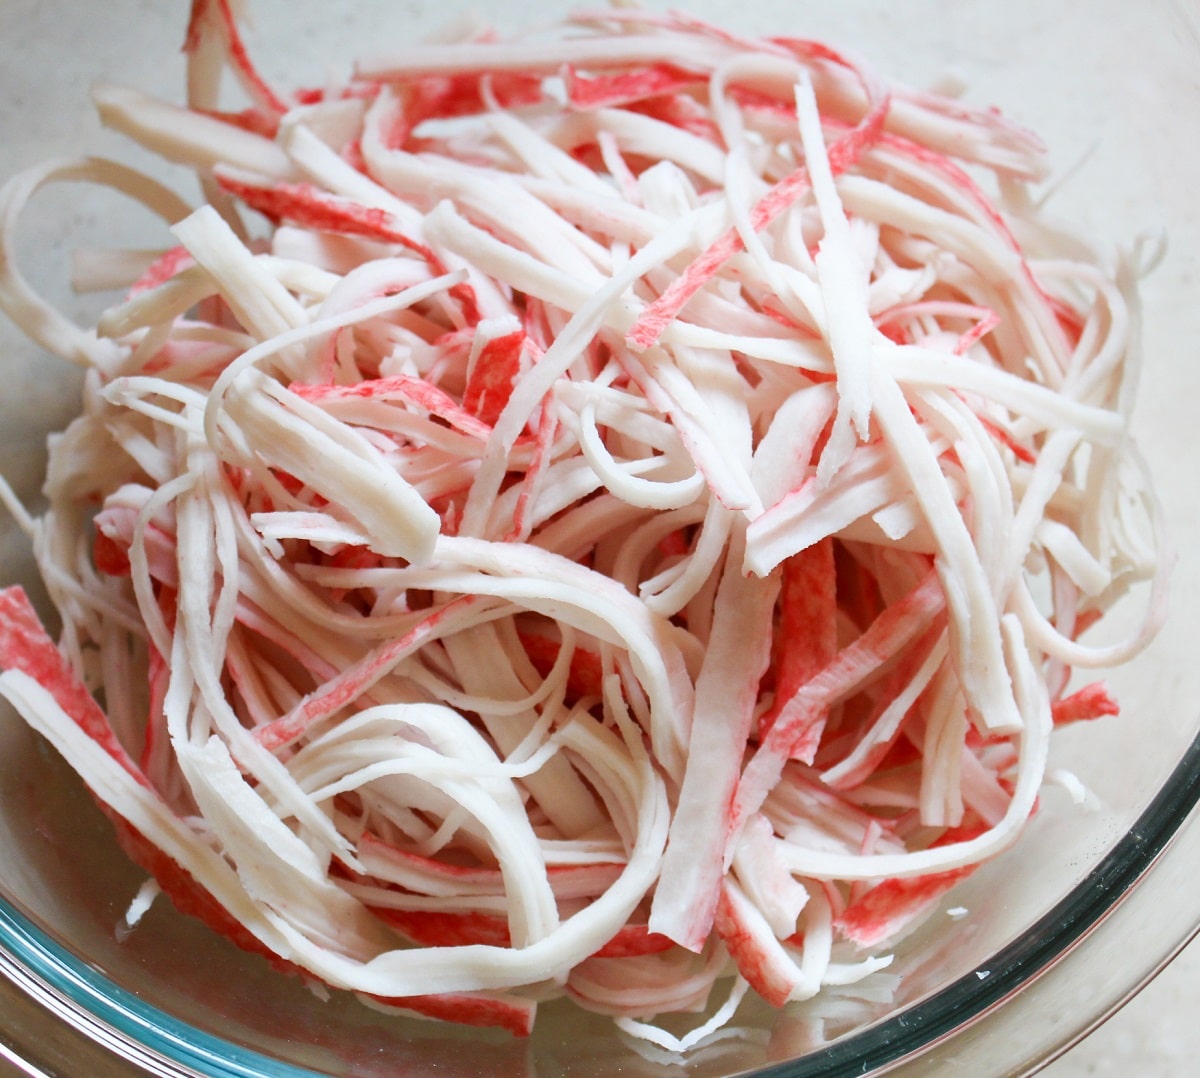 strips of kani in a bowl